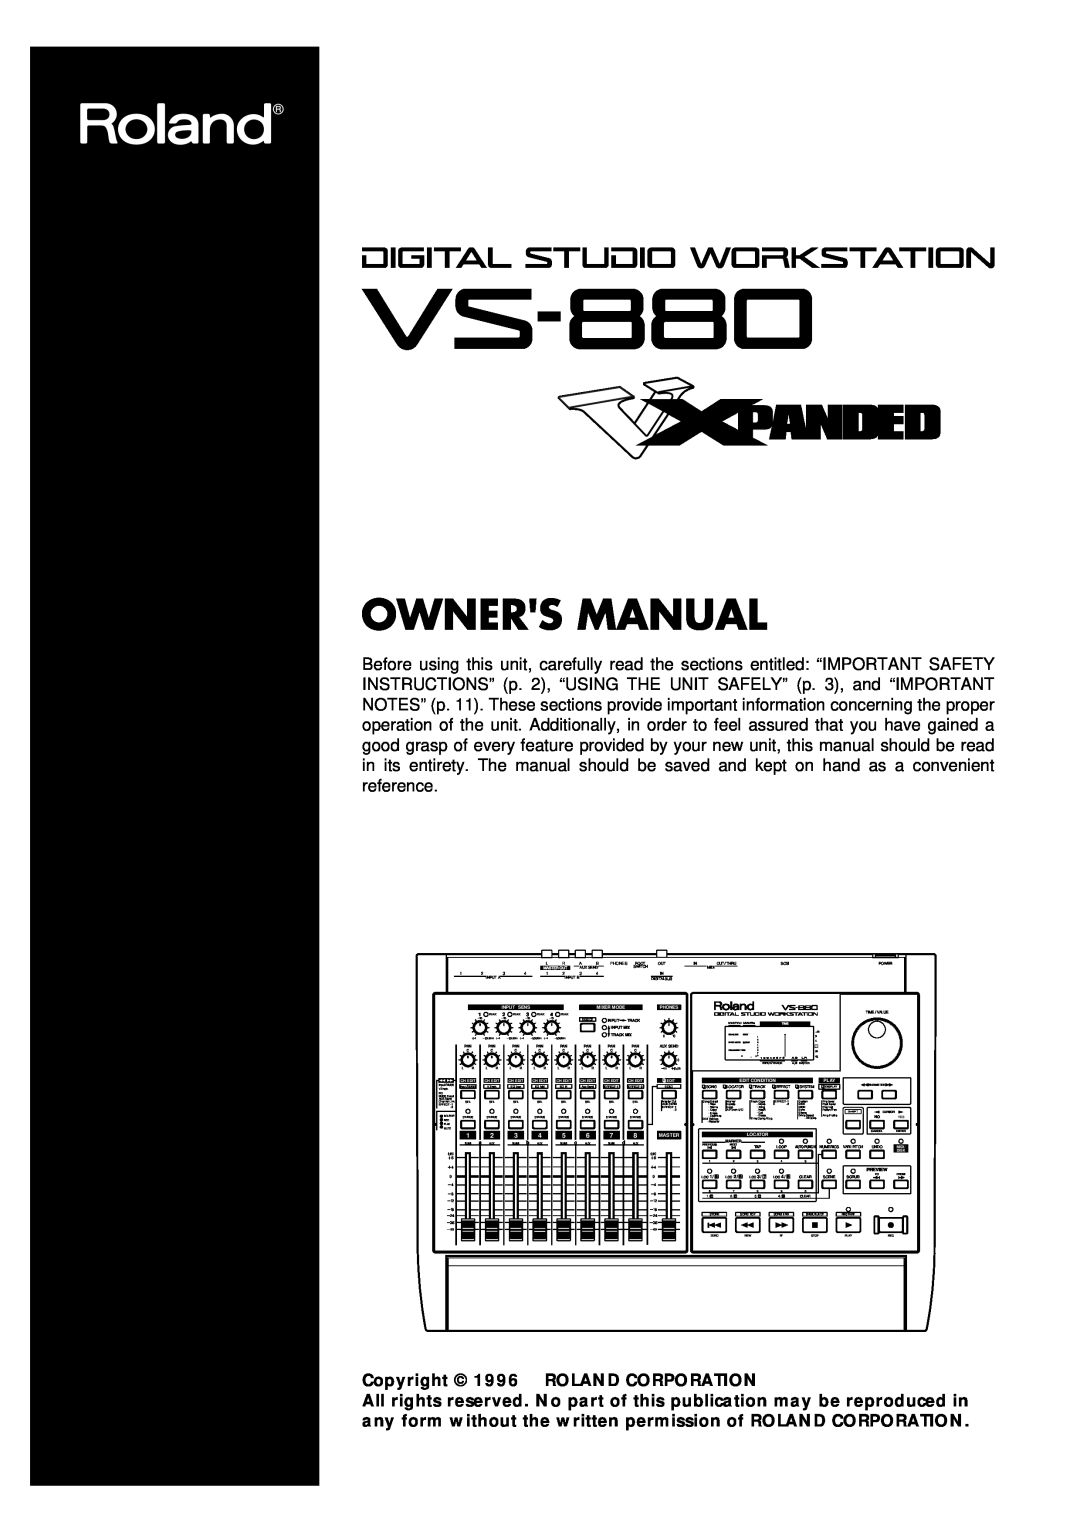 Roland Vs-880 important safety instructions Copyright 1996 ROLAND CORPORATION, Master Out, Input Sens, Mixer Mode, Track 